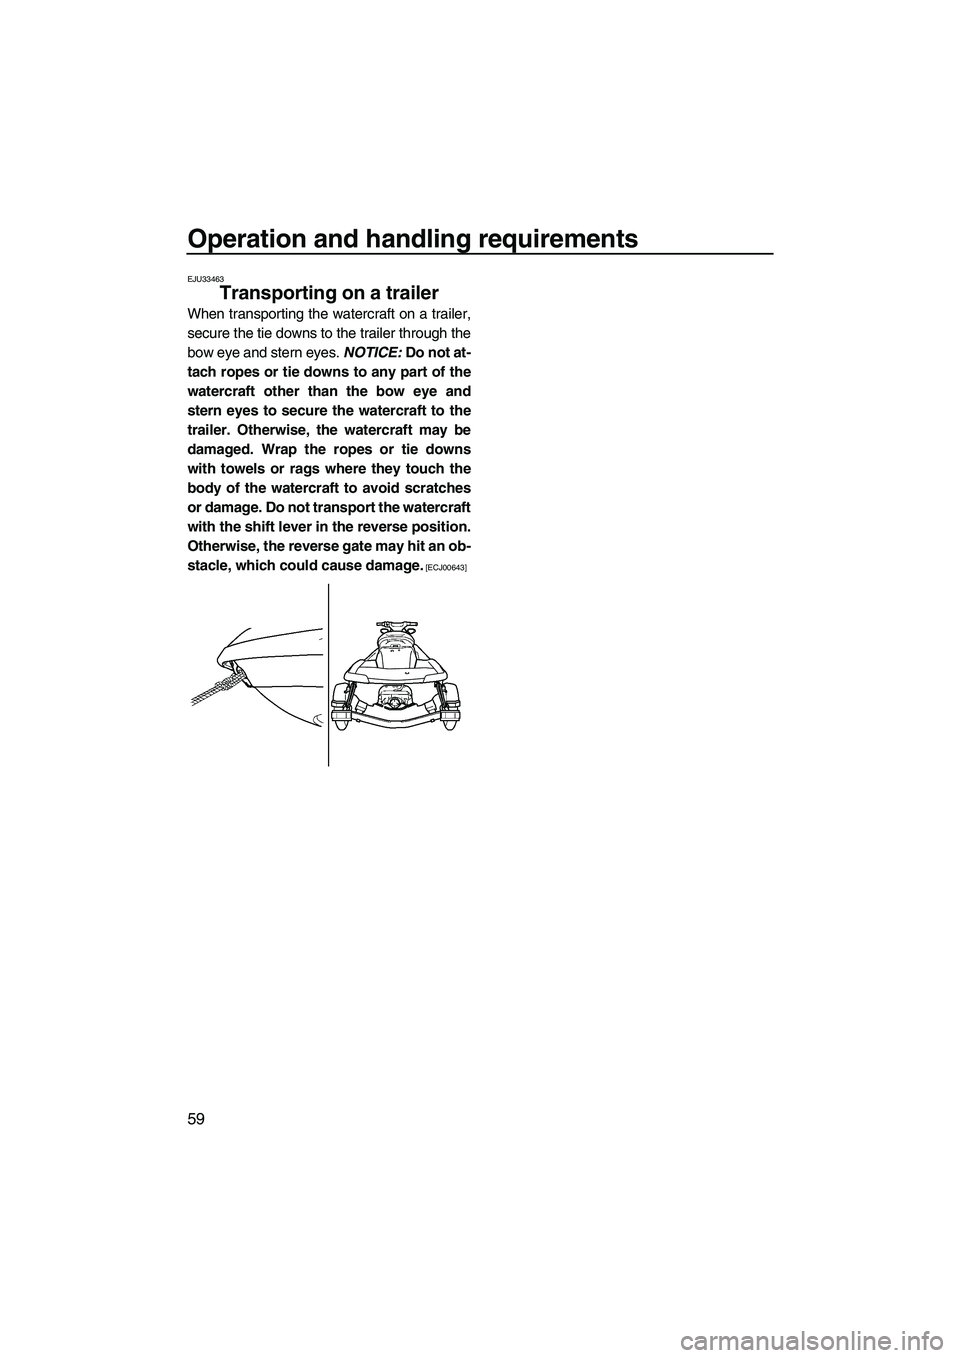 YAMAHA FX SHO 2010  Owners Manual Operation and handling requirements
59
EJU33463
Transporting on a trailer 
When transporting the watercraft on a trailer,
secure the tie downs to the trailer through the
bow eye and stern eyes. NOTICE